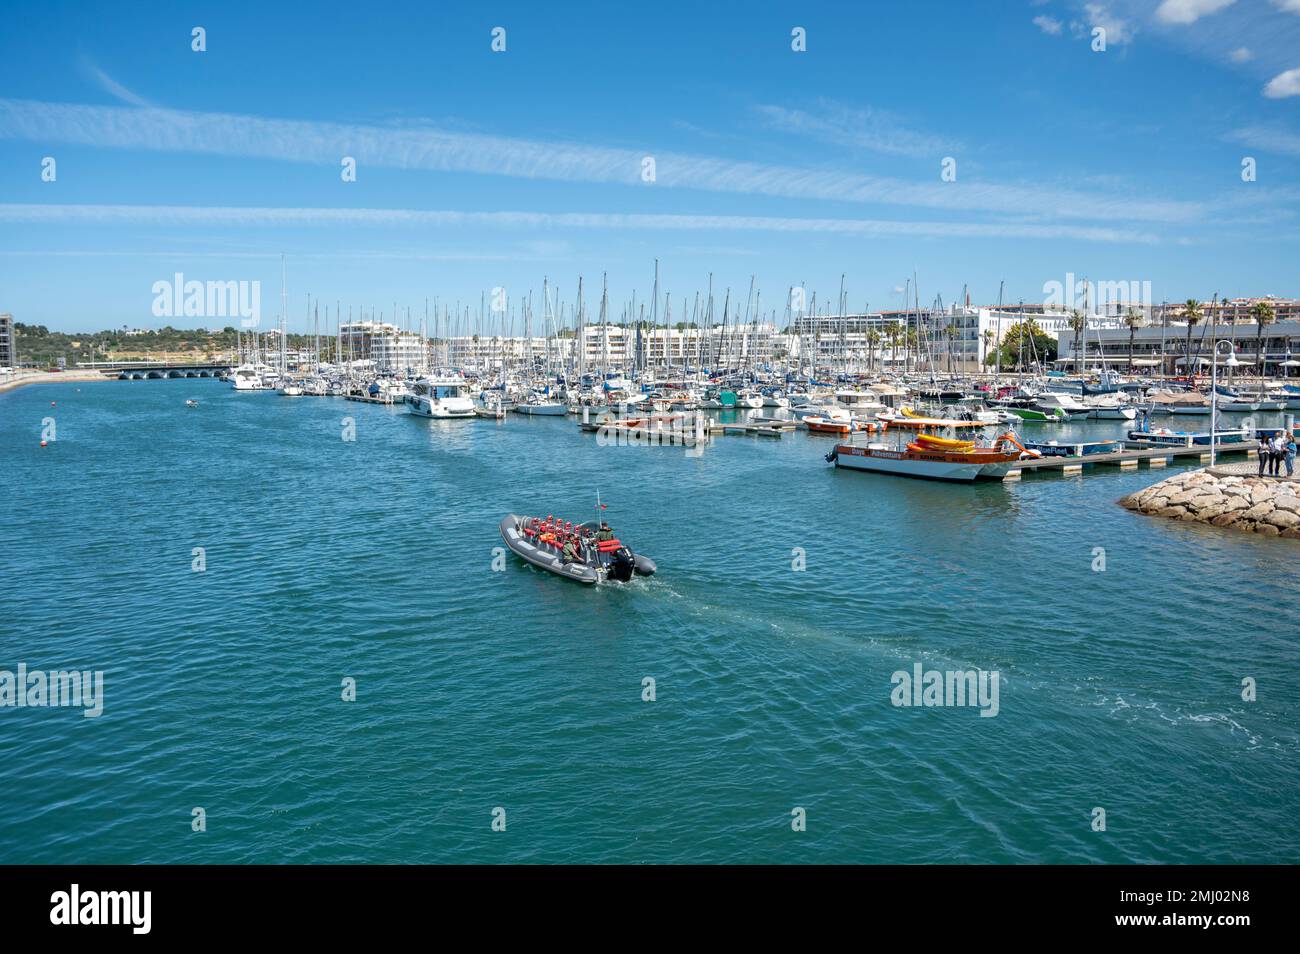 Boats in the harbour or marina at Lagos Algarve Portugal Stock Photo